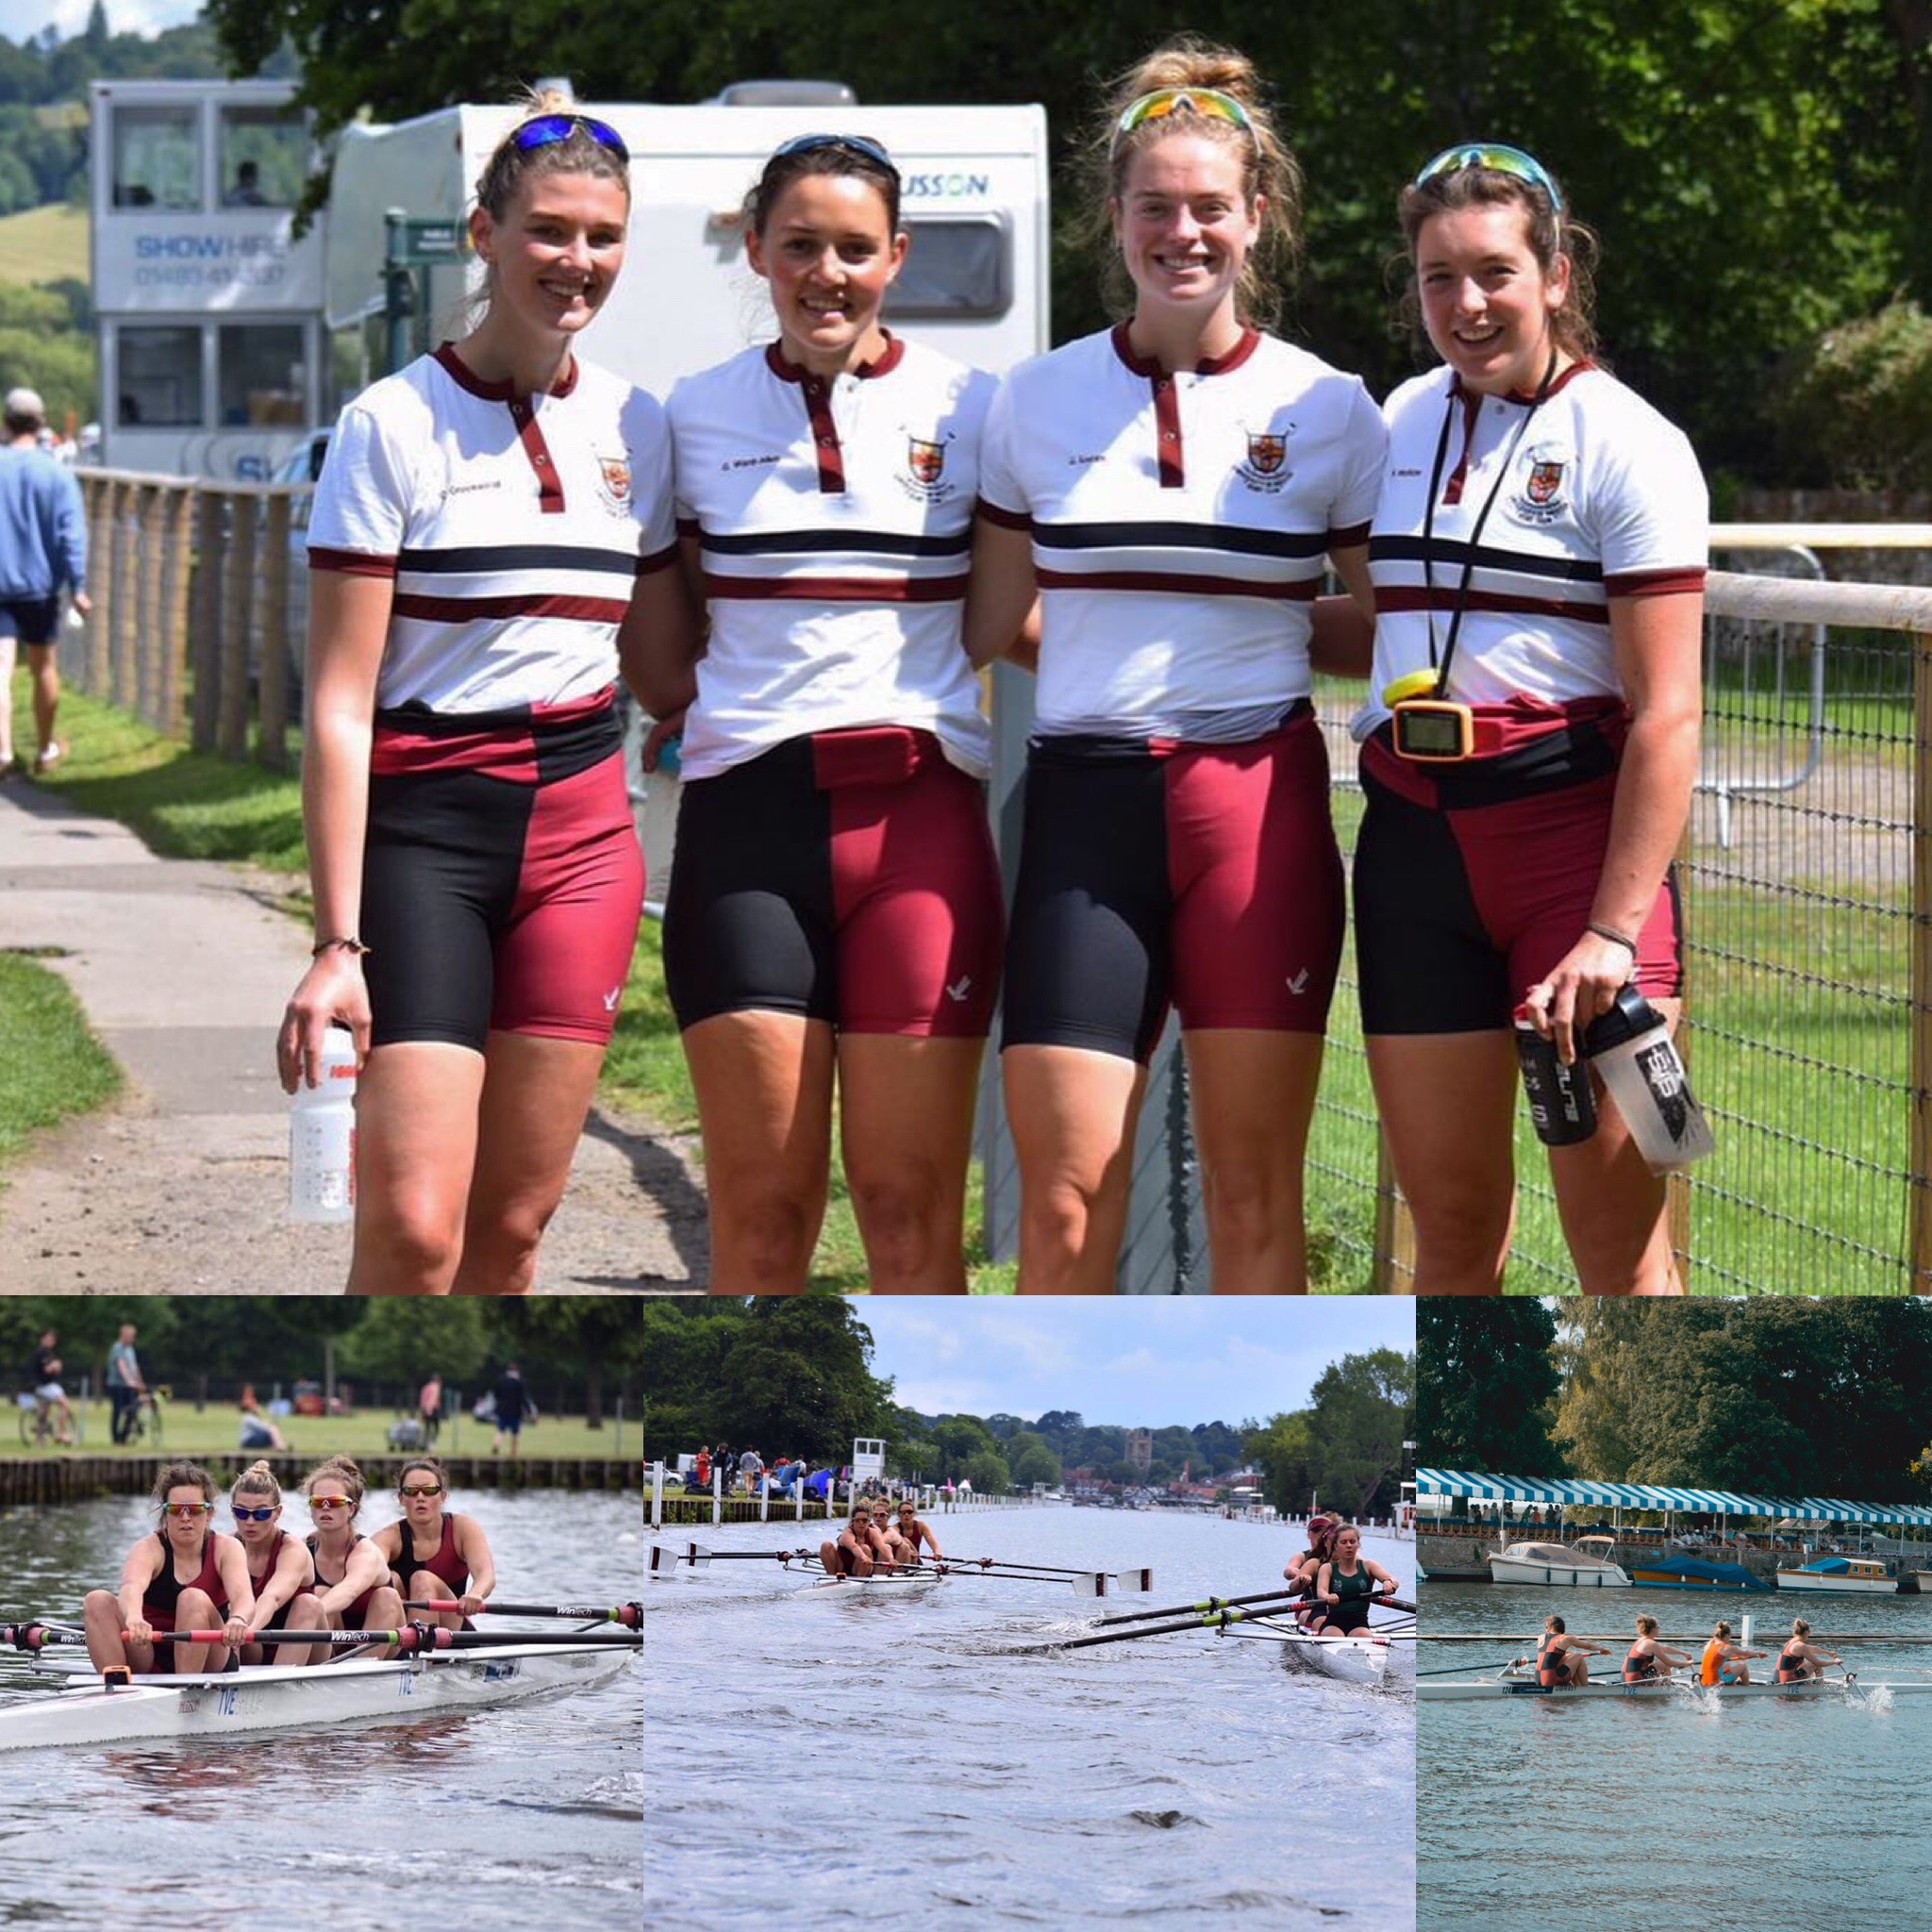 Top: Our top boat just after qualifying at HWR.
Bottom left: racing off the start against Njord
Bottom middle: Cruising to a comfortable win over Leeds
Bottom right: The composite with Wallingford at HRR Qualifiers